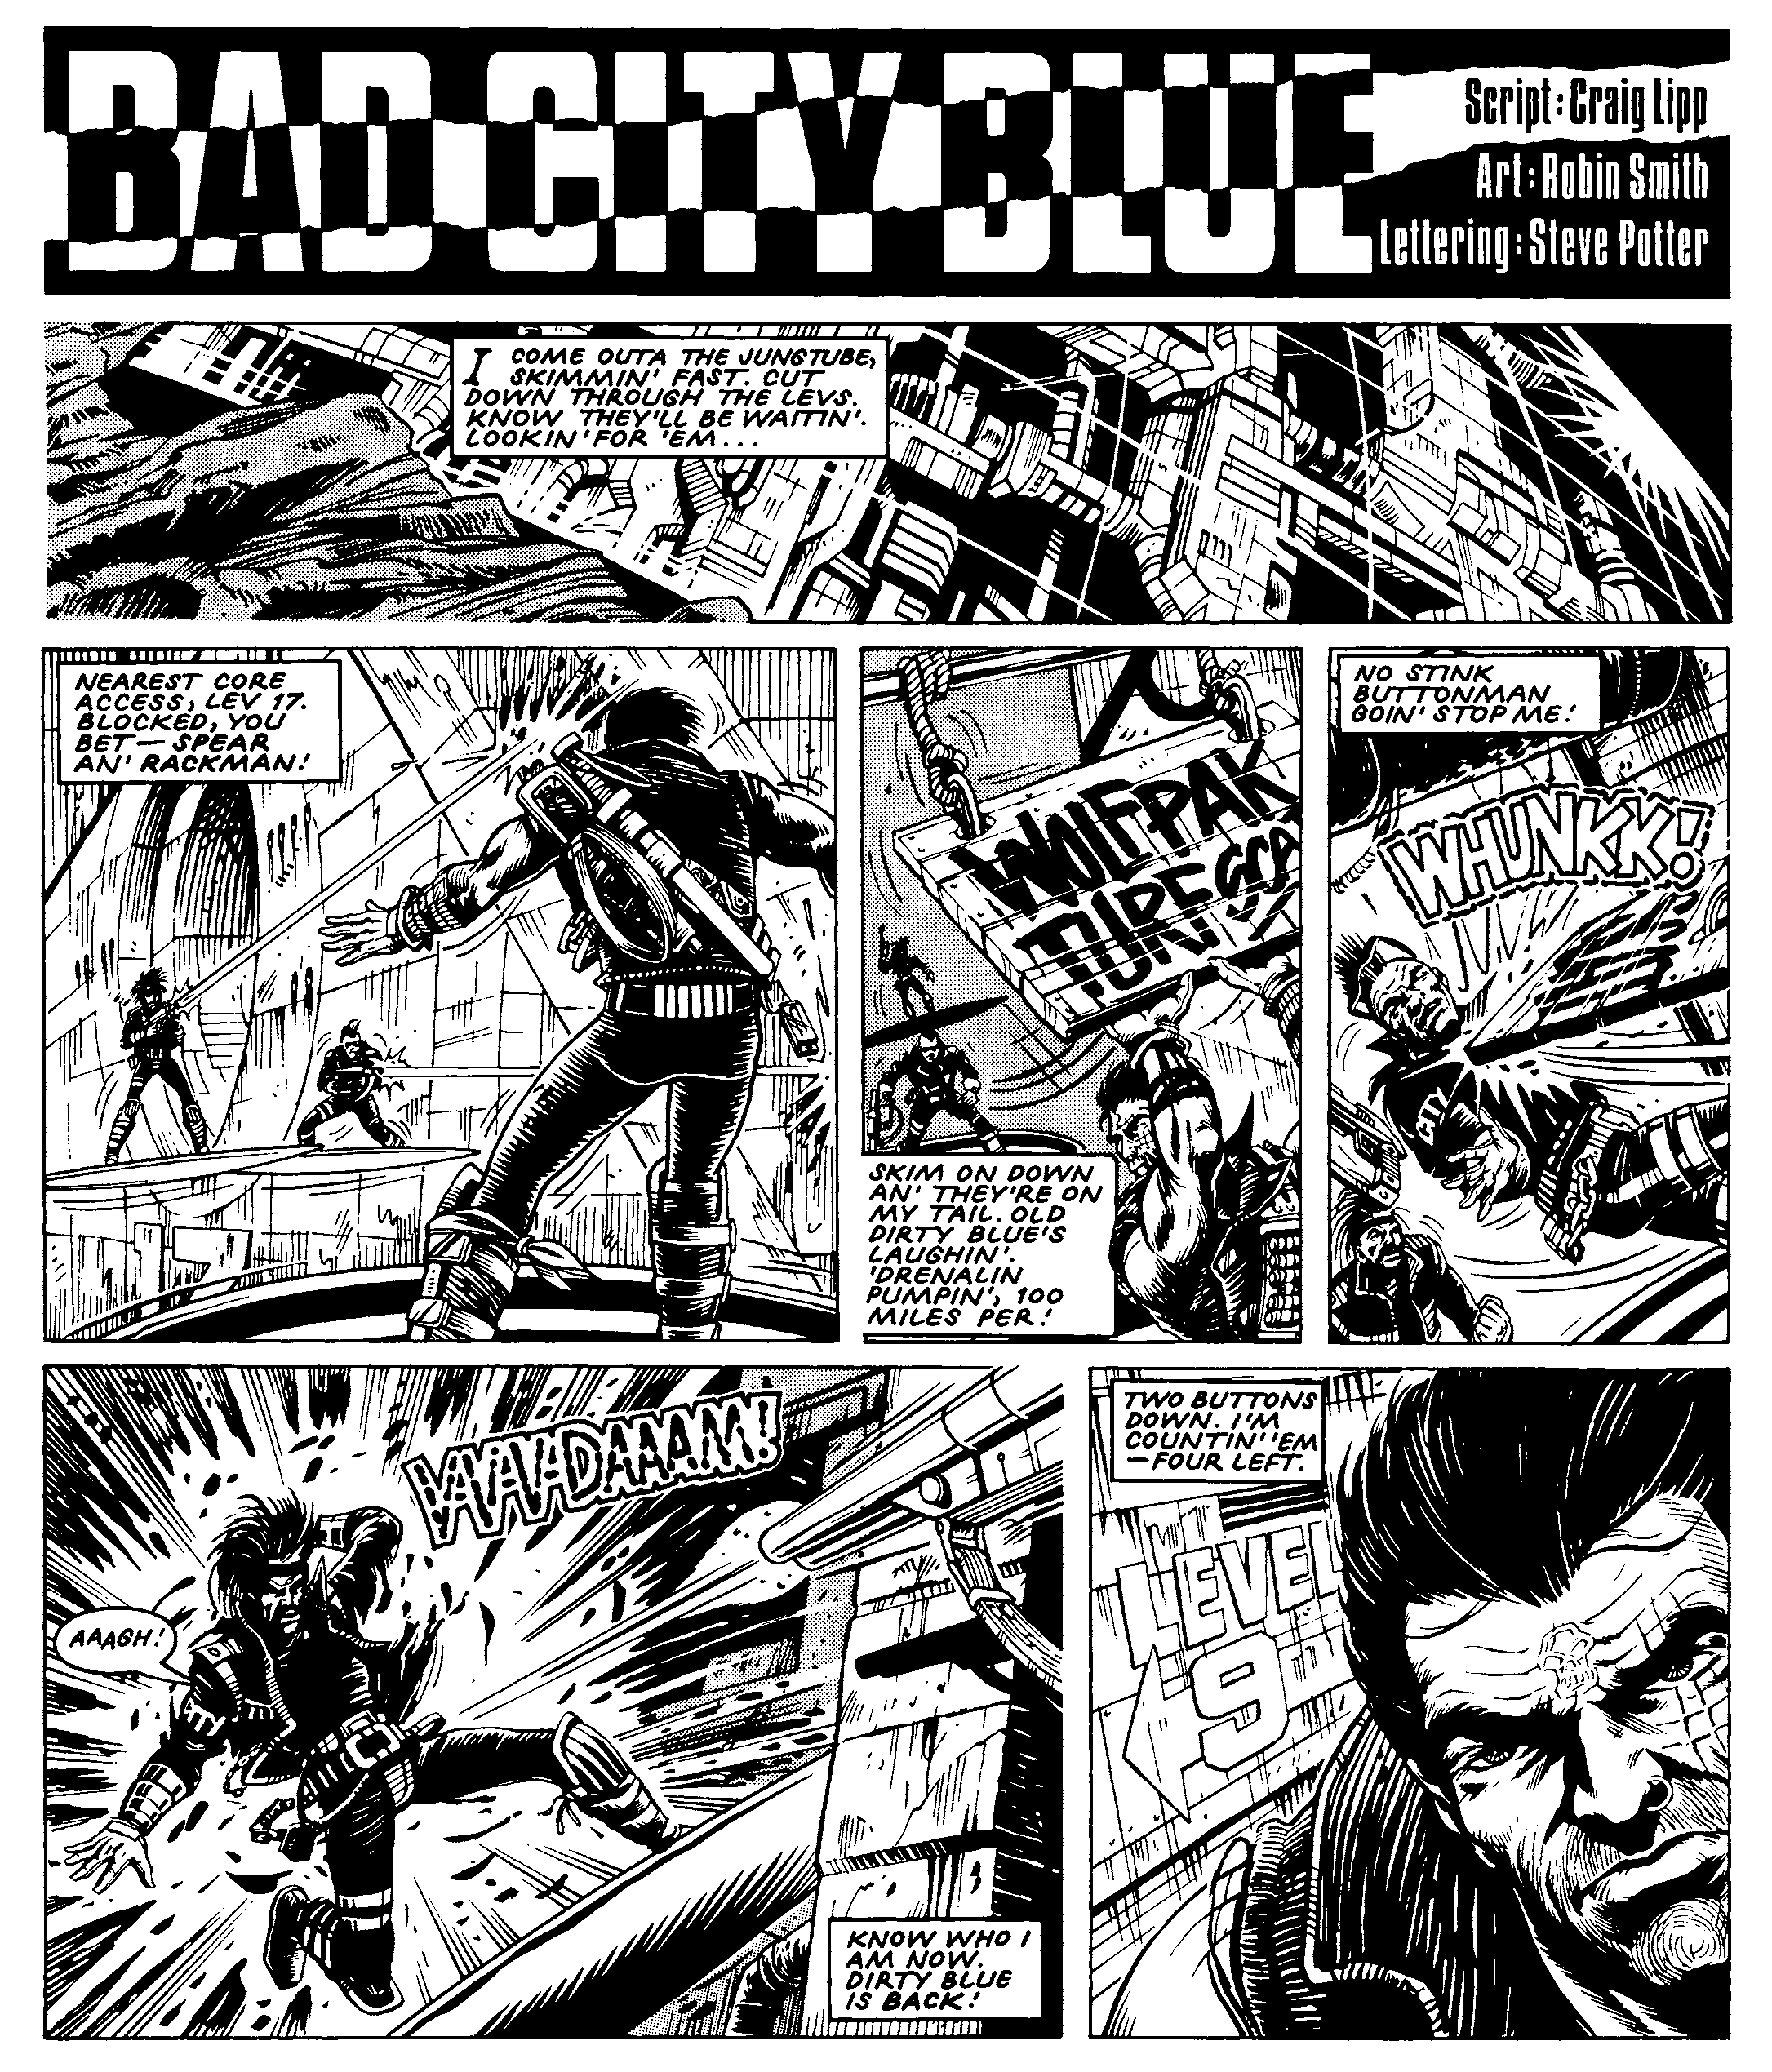 Read online Bad City Blue comic -  Issue # Full - 44